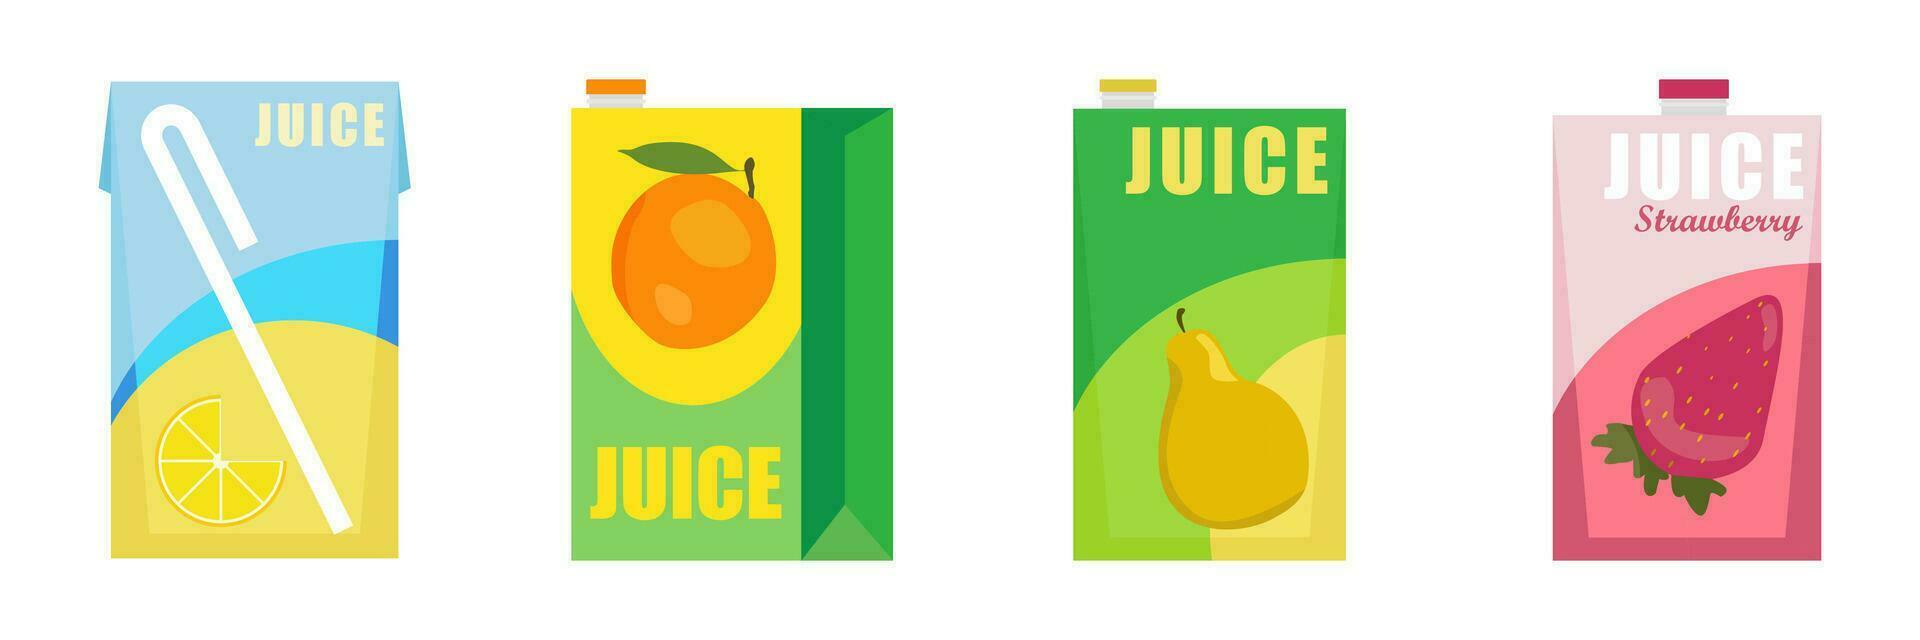 Realistic mockup of pack and box of orange juice. Set of cardboard boxes and packaging for orange juice and drinks, view from different sides. Isolated realistic vector illustration.